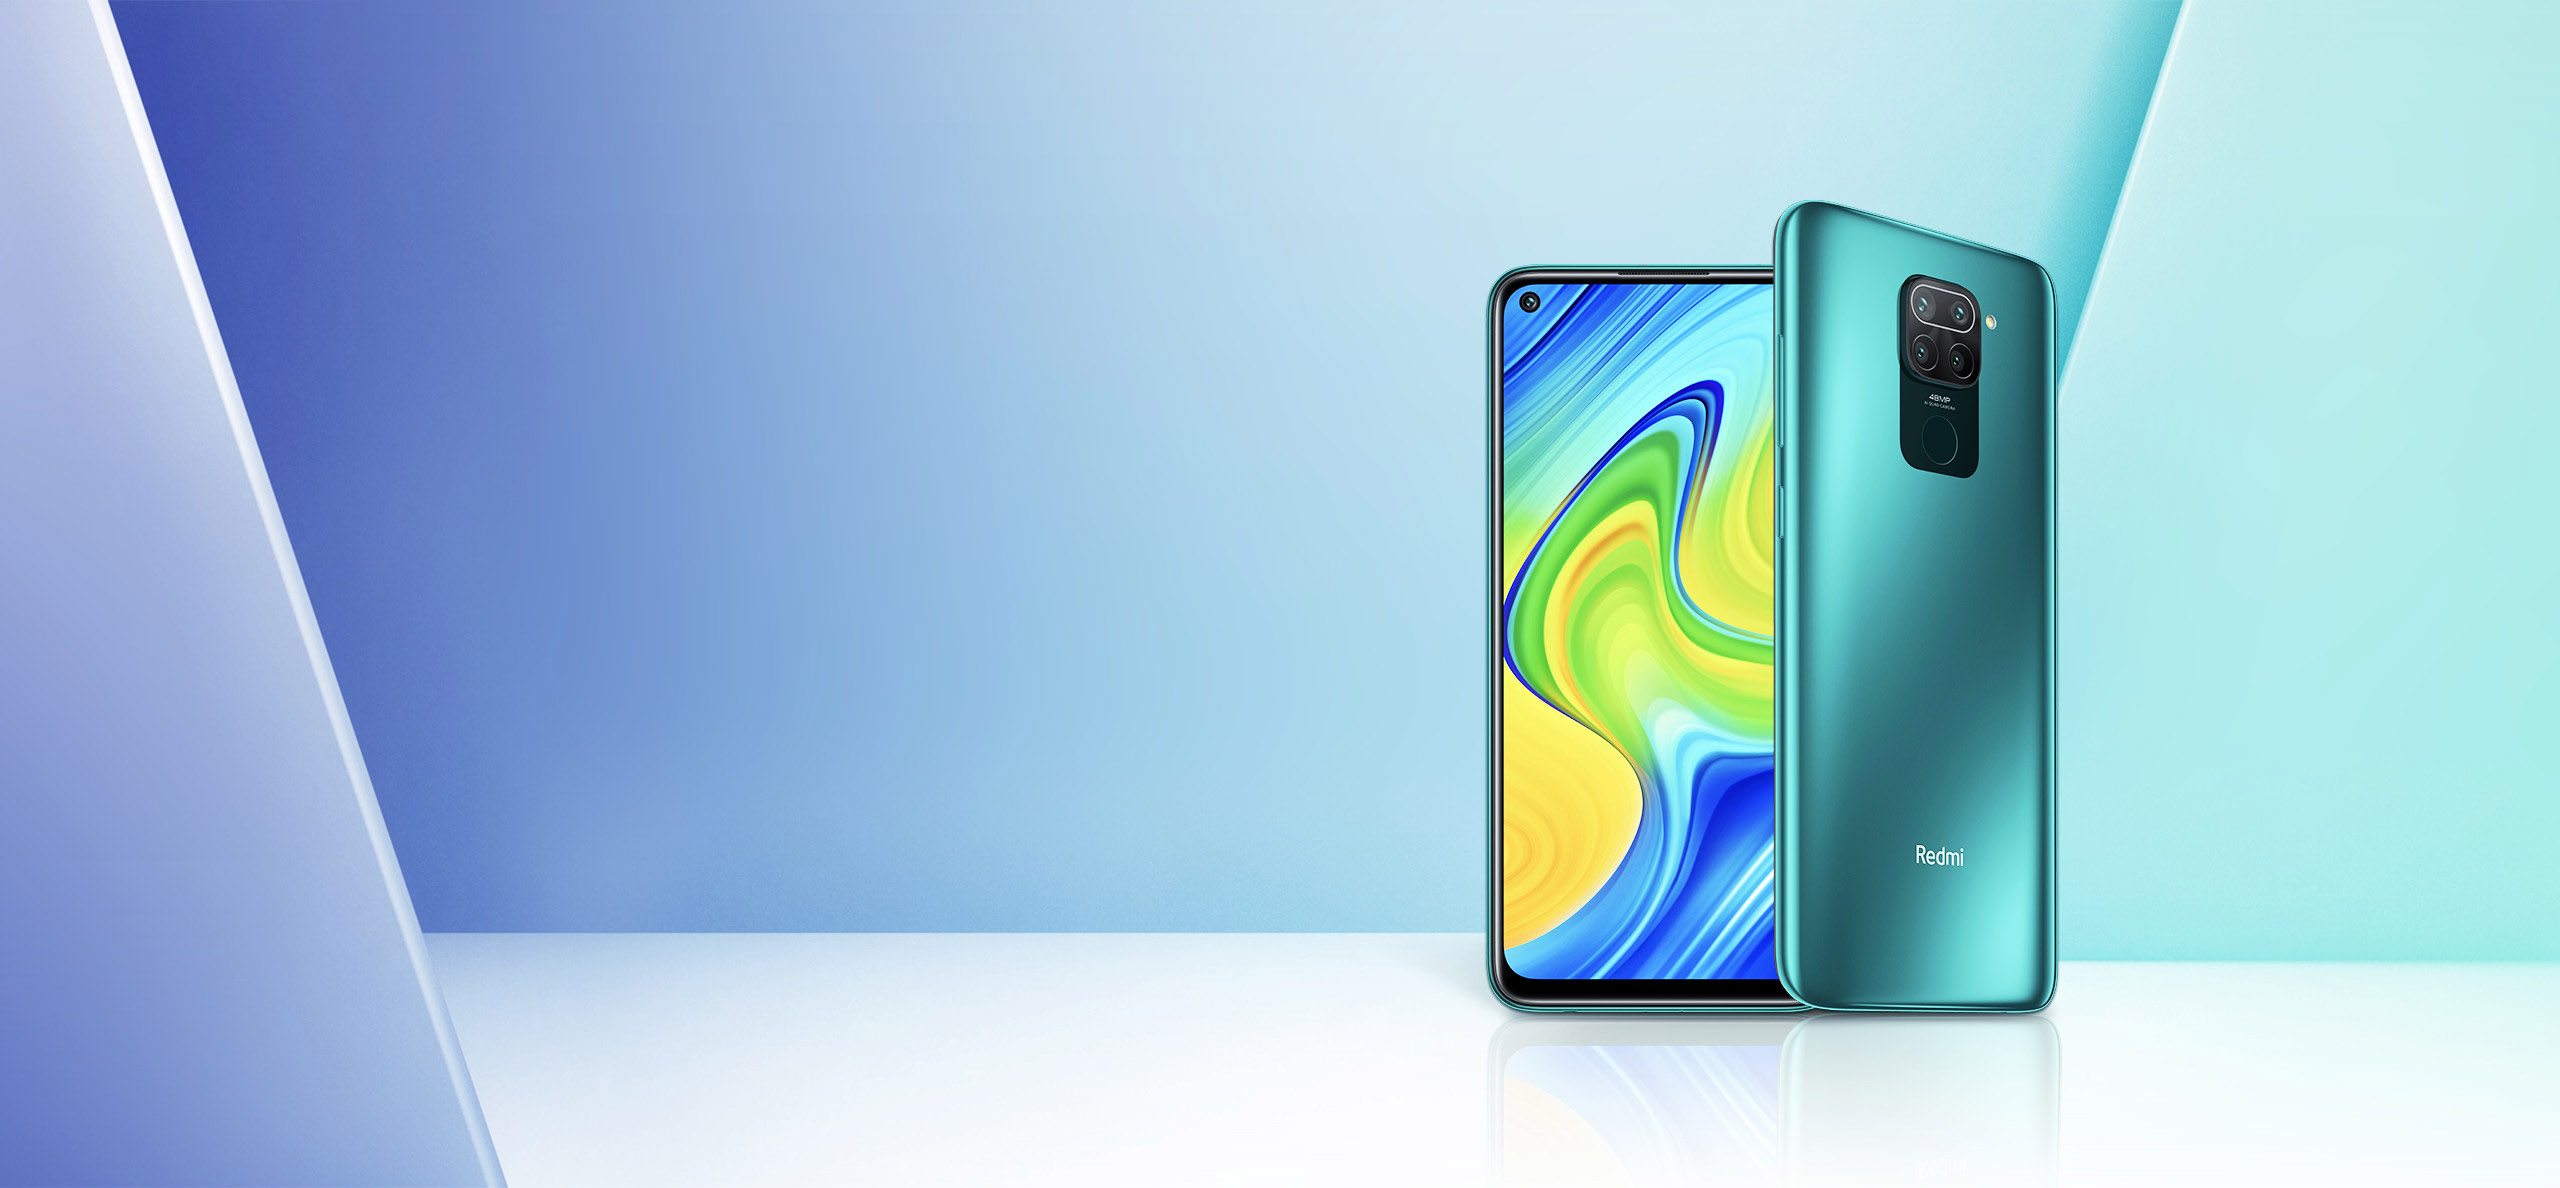 Redmi Note 9 launched in india for Rs. 11.999 with 6.53-Inch and Helio G85 SoC